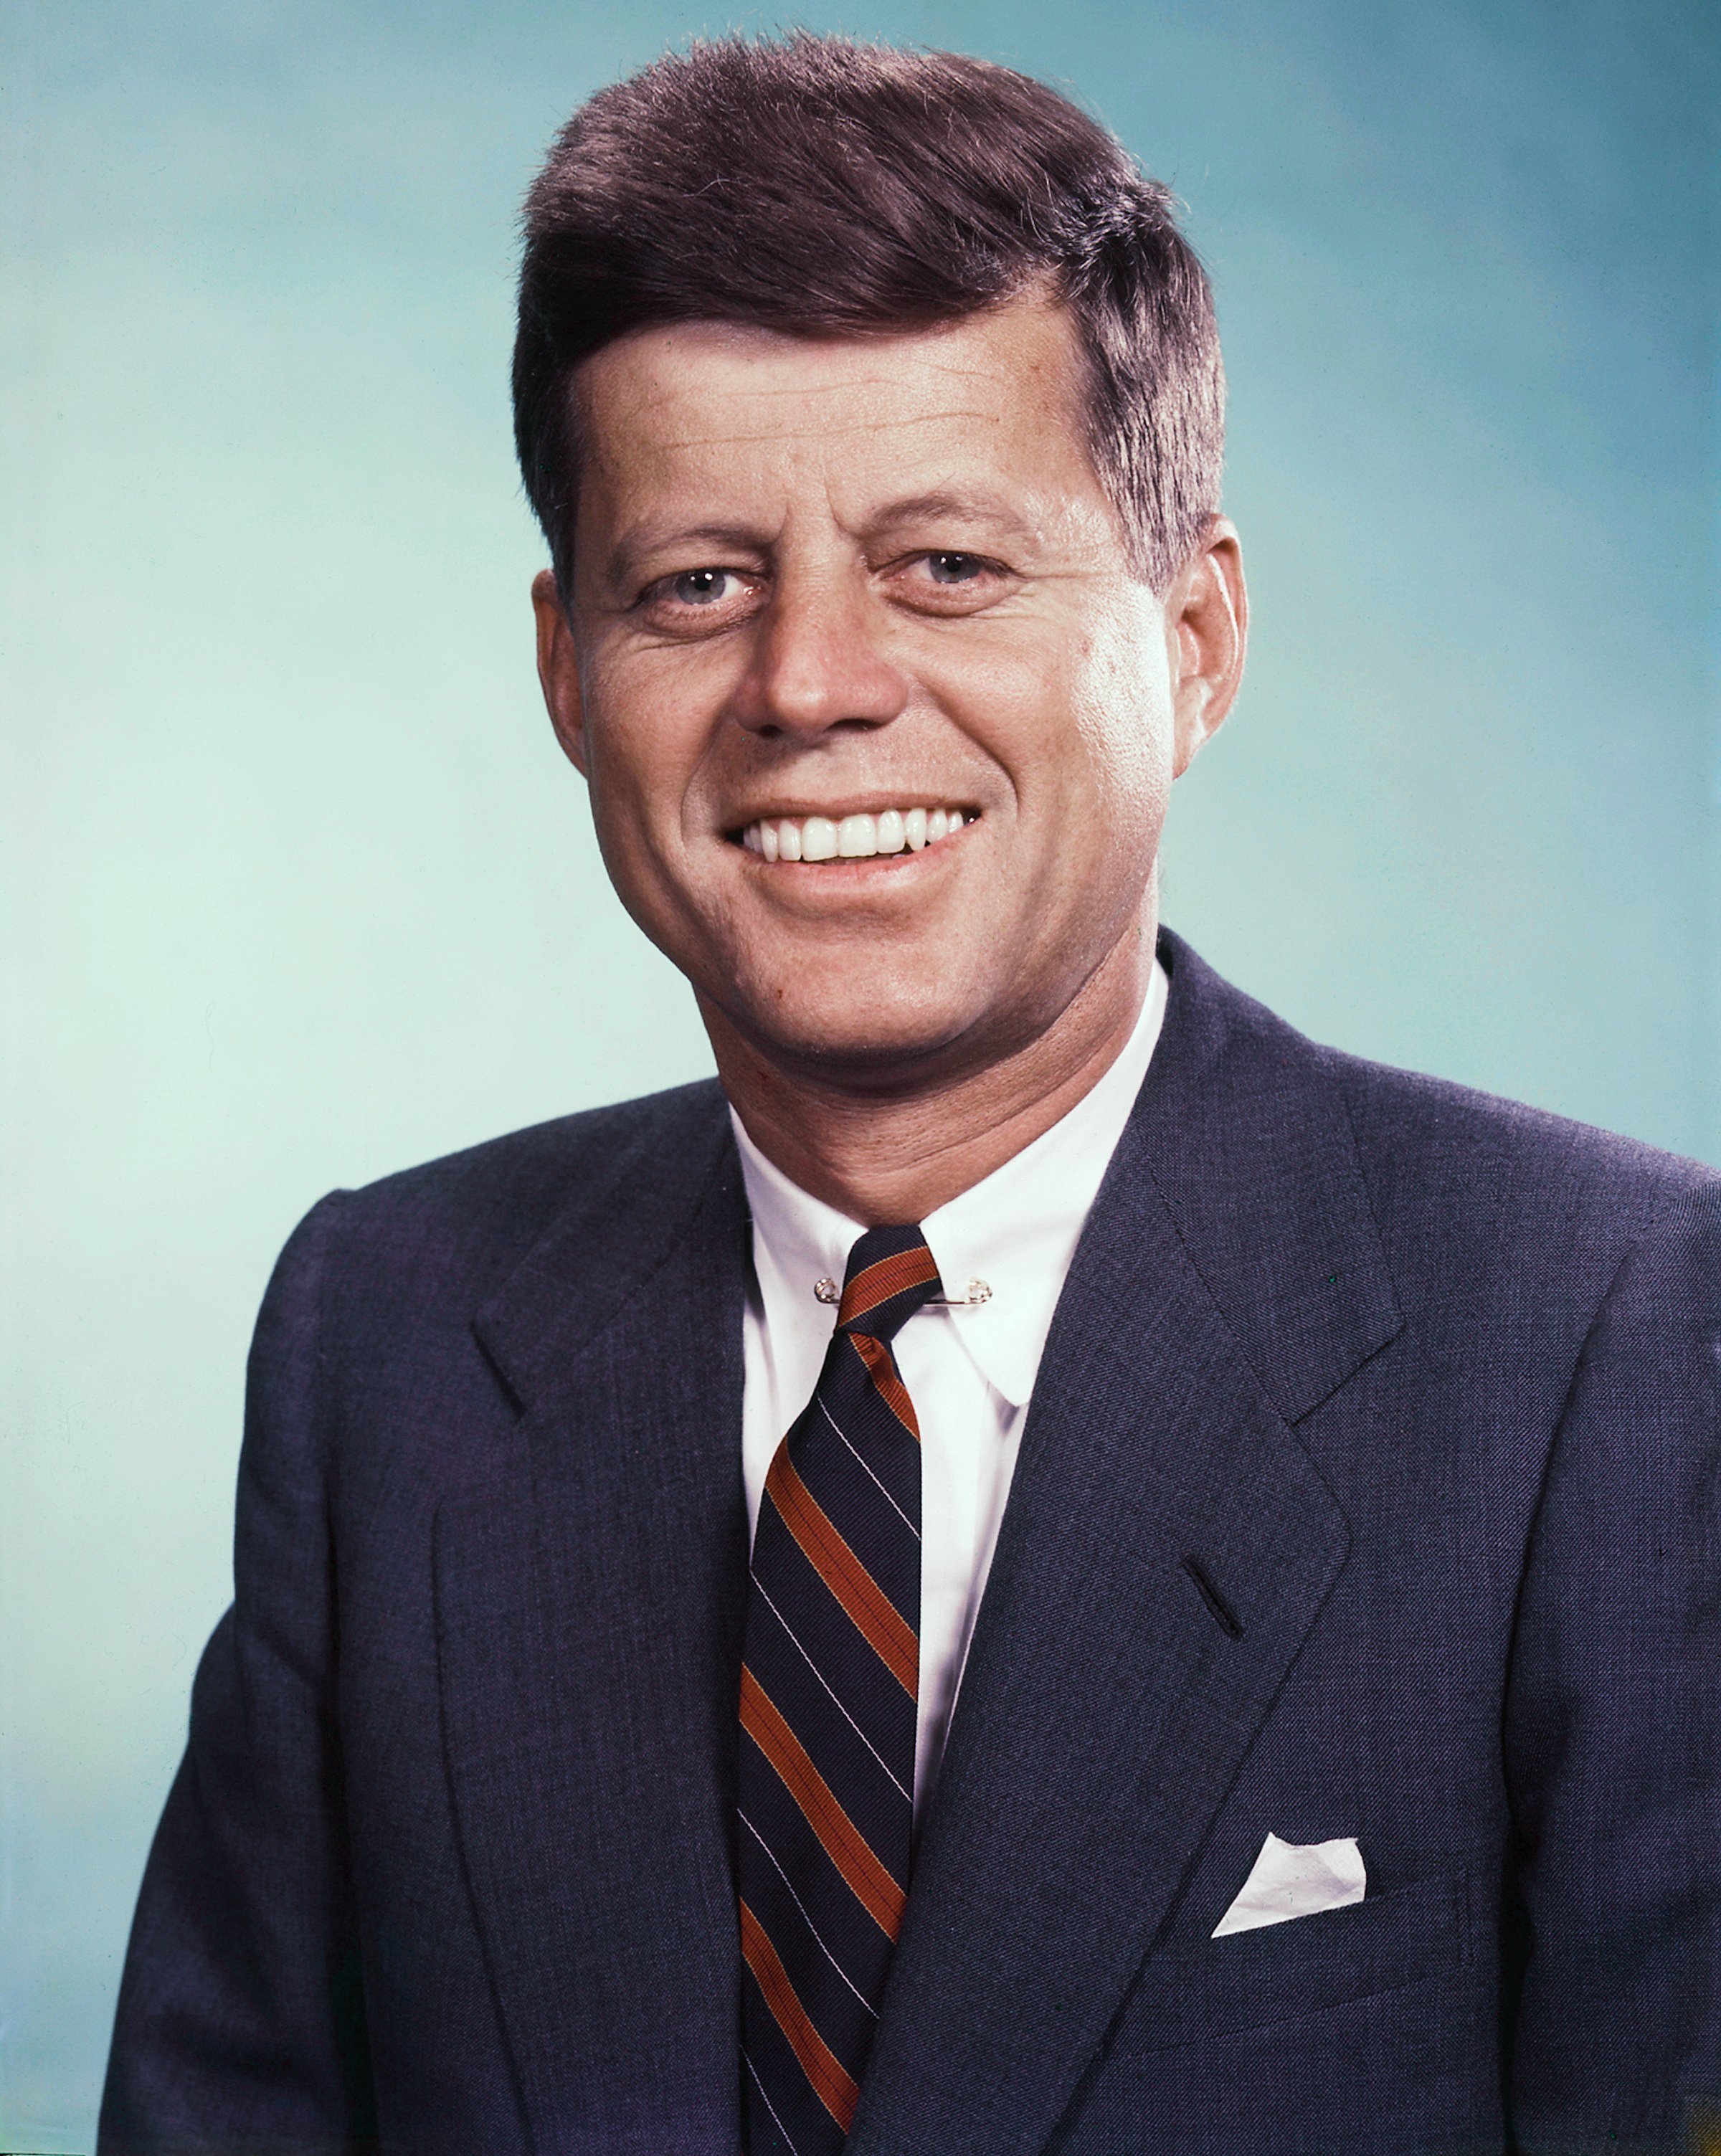 President John F. Kennedy photographed in the Daily News color studio. | Source: Getty Images